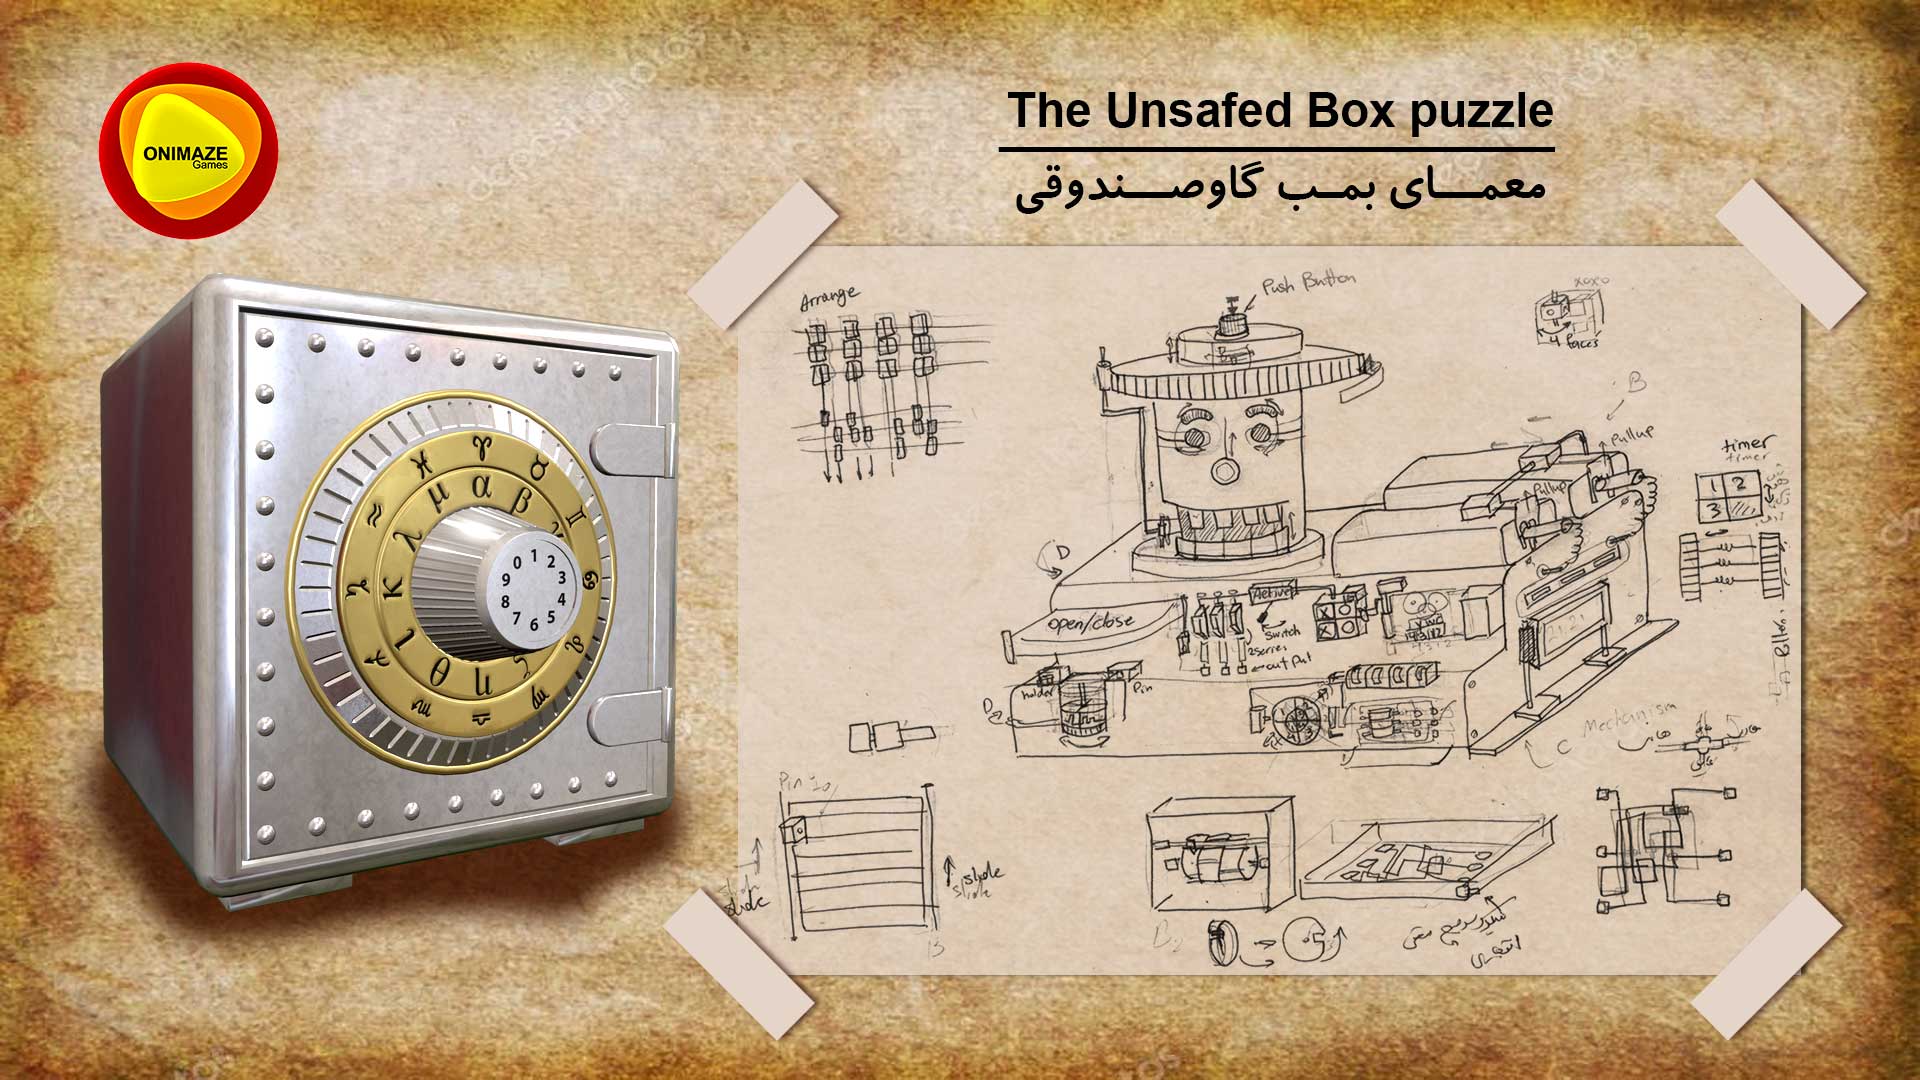 The Unsafed Box Puzzle